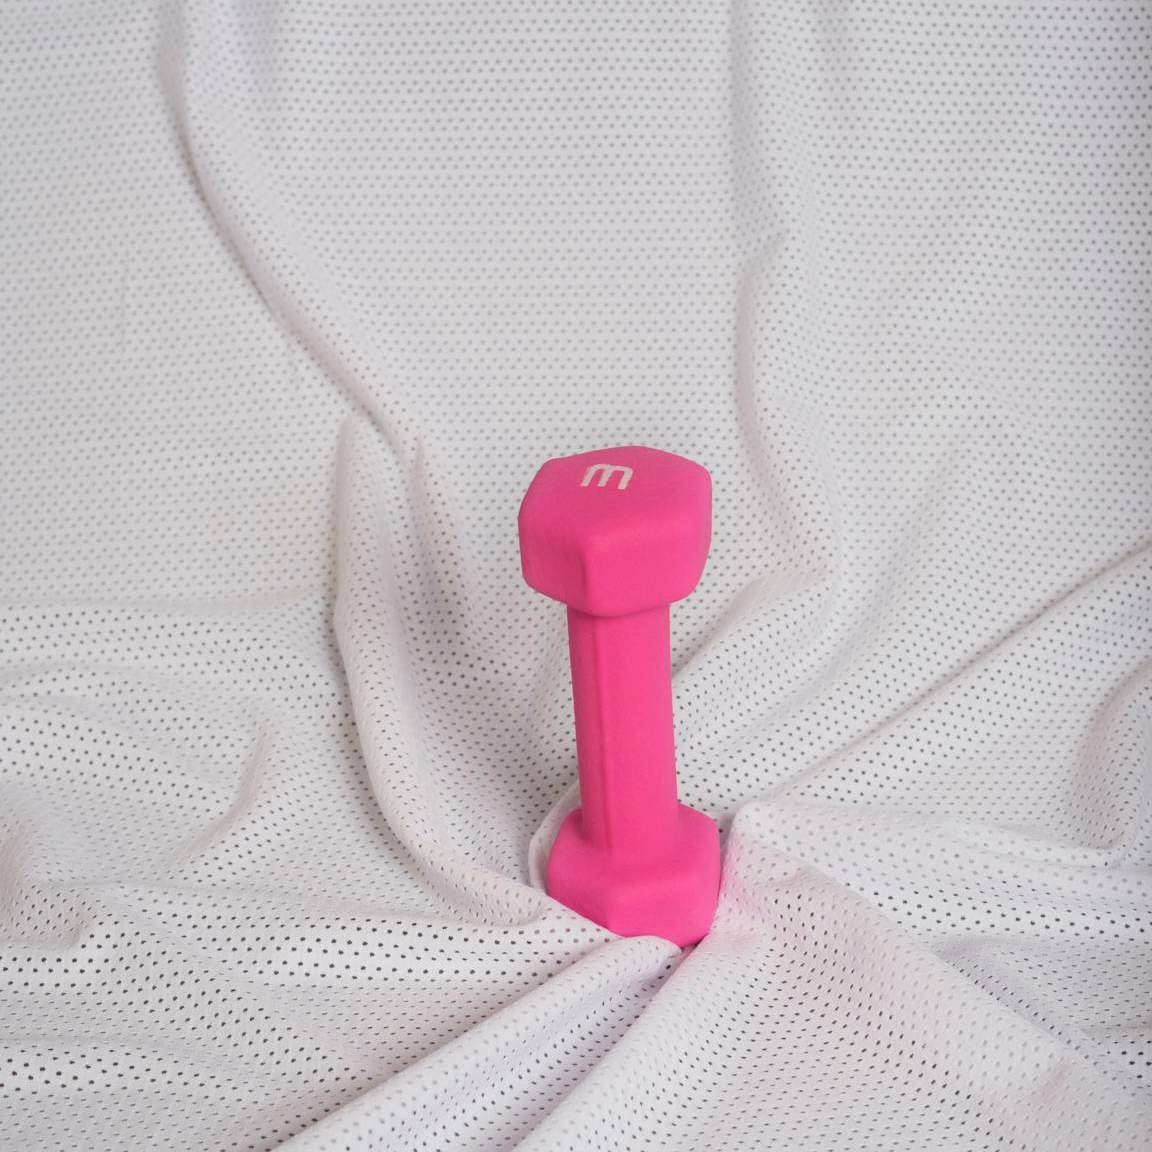 Student Work Pink Dumbell on a White Sheet